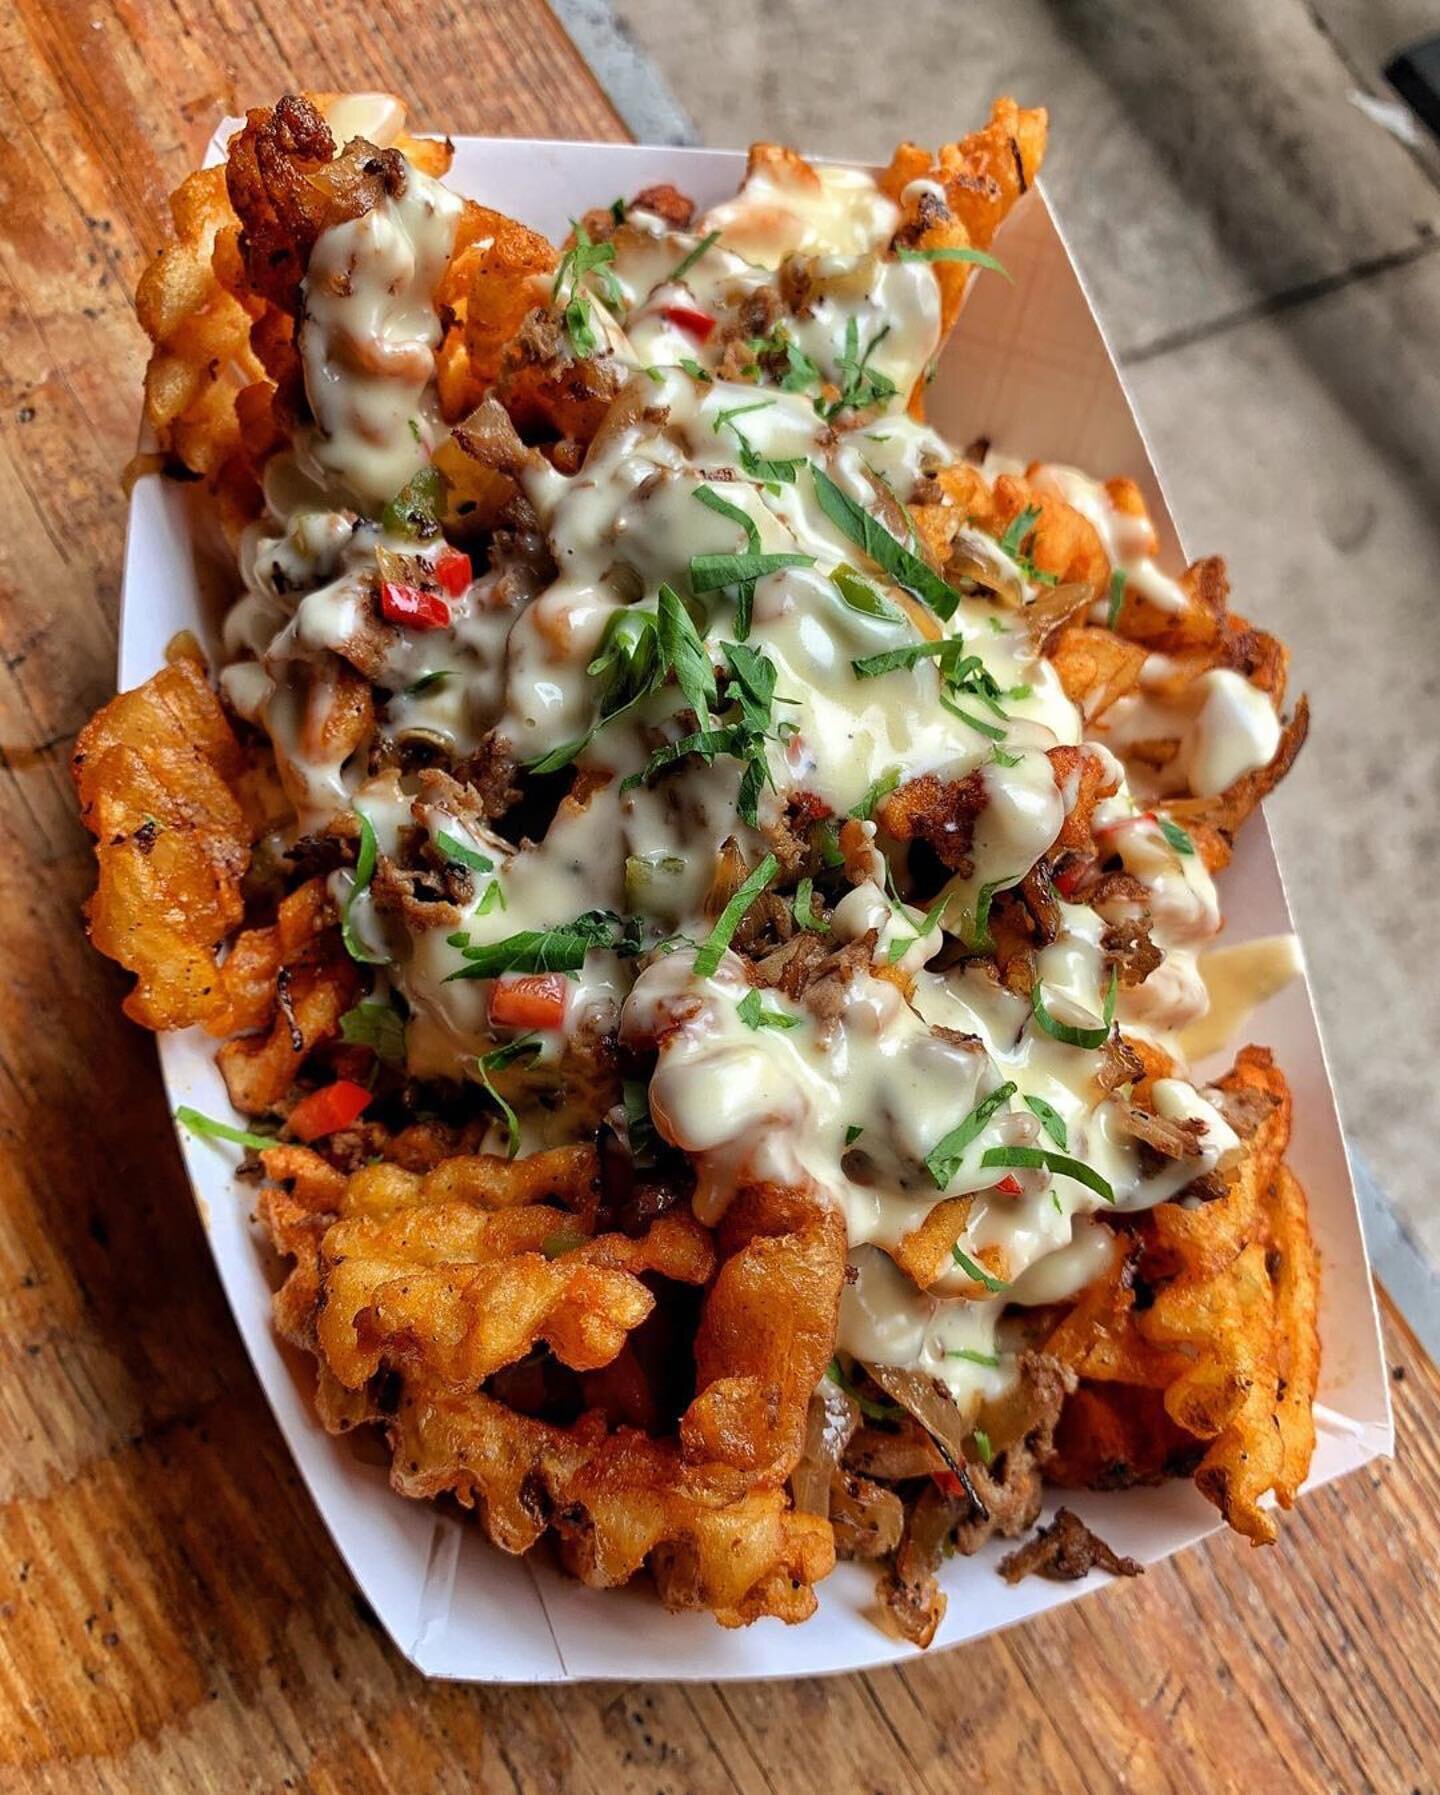 STEAK-UMM FRIES for #FryDay! 🍟💥 Seasoned waffle fries topped with chopped steak, STEEZ sauce, peppers &amp; onions. Let the weekend begin. #ATTHEWALLACE